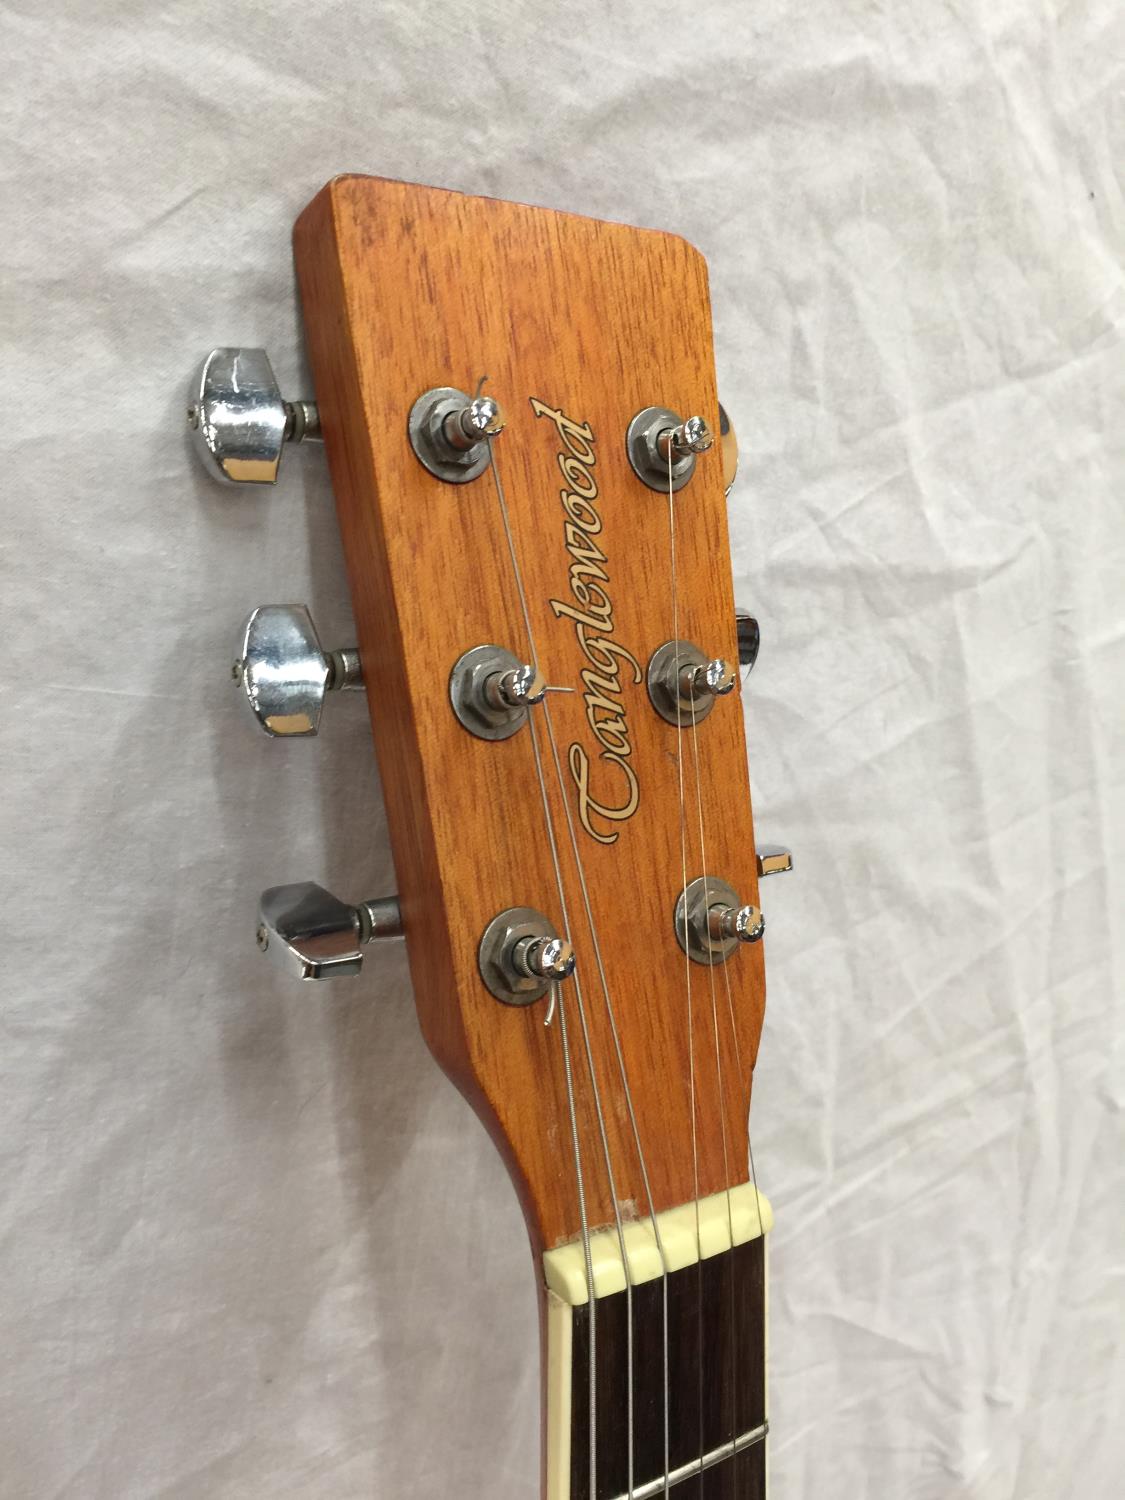 A TANGLEWOOD NASHVILLE SEMI ACOUSTIC GUITAR - Image 8 of 15